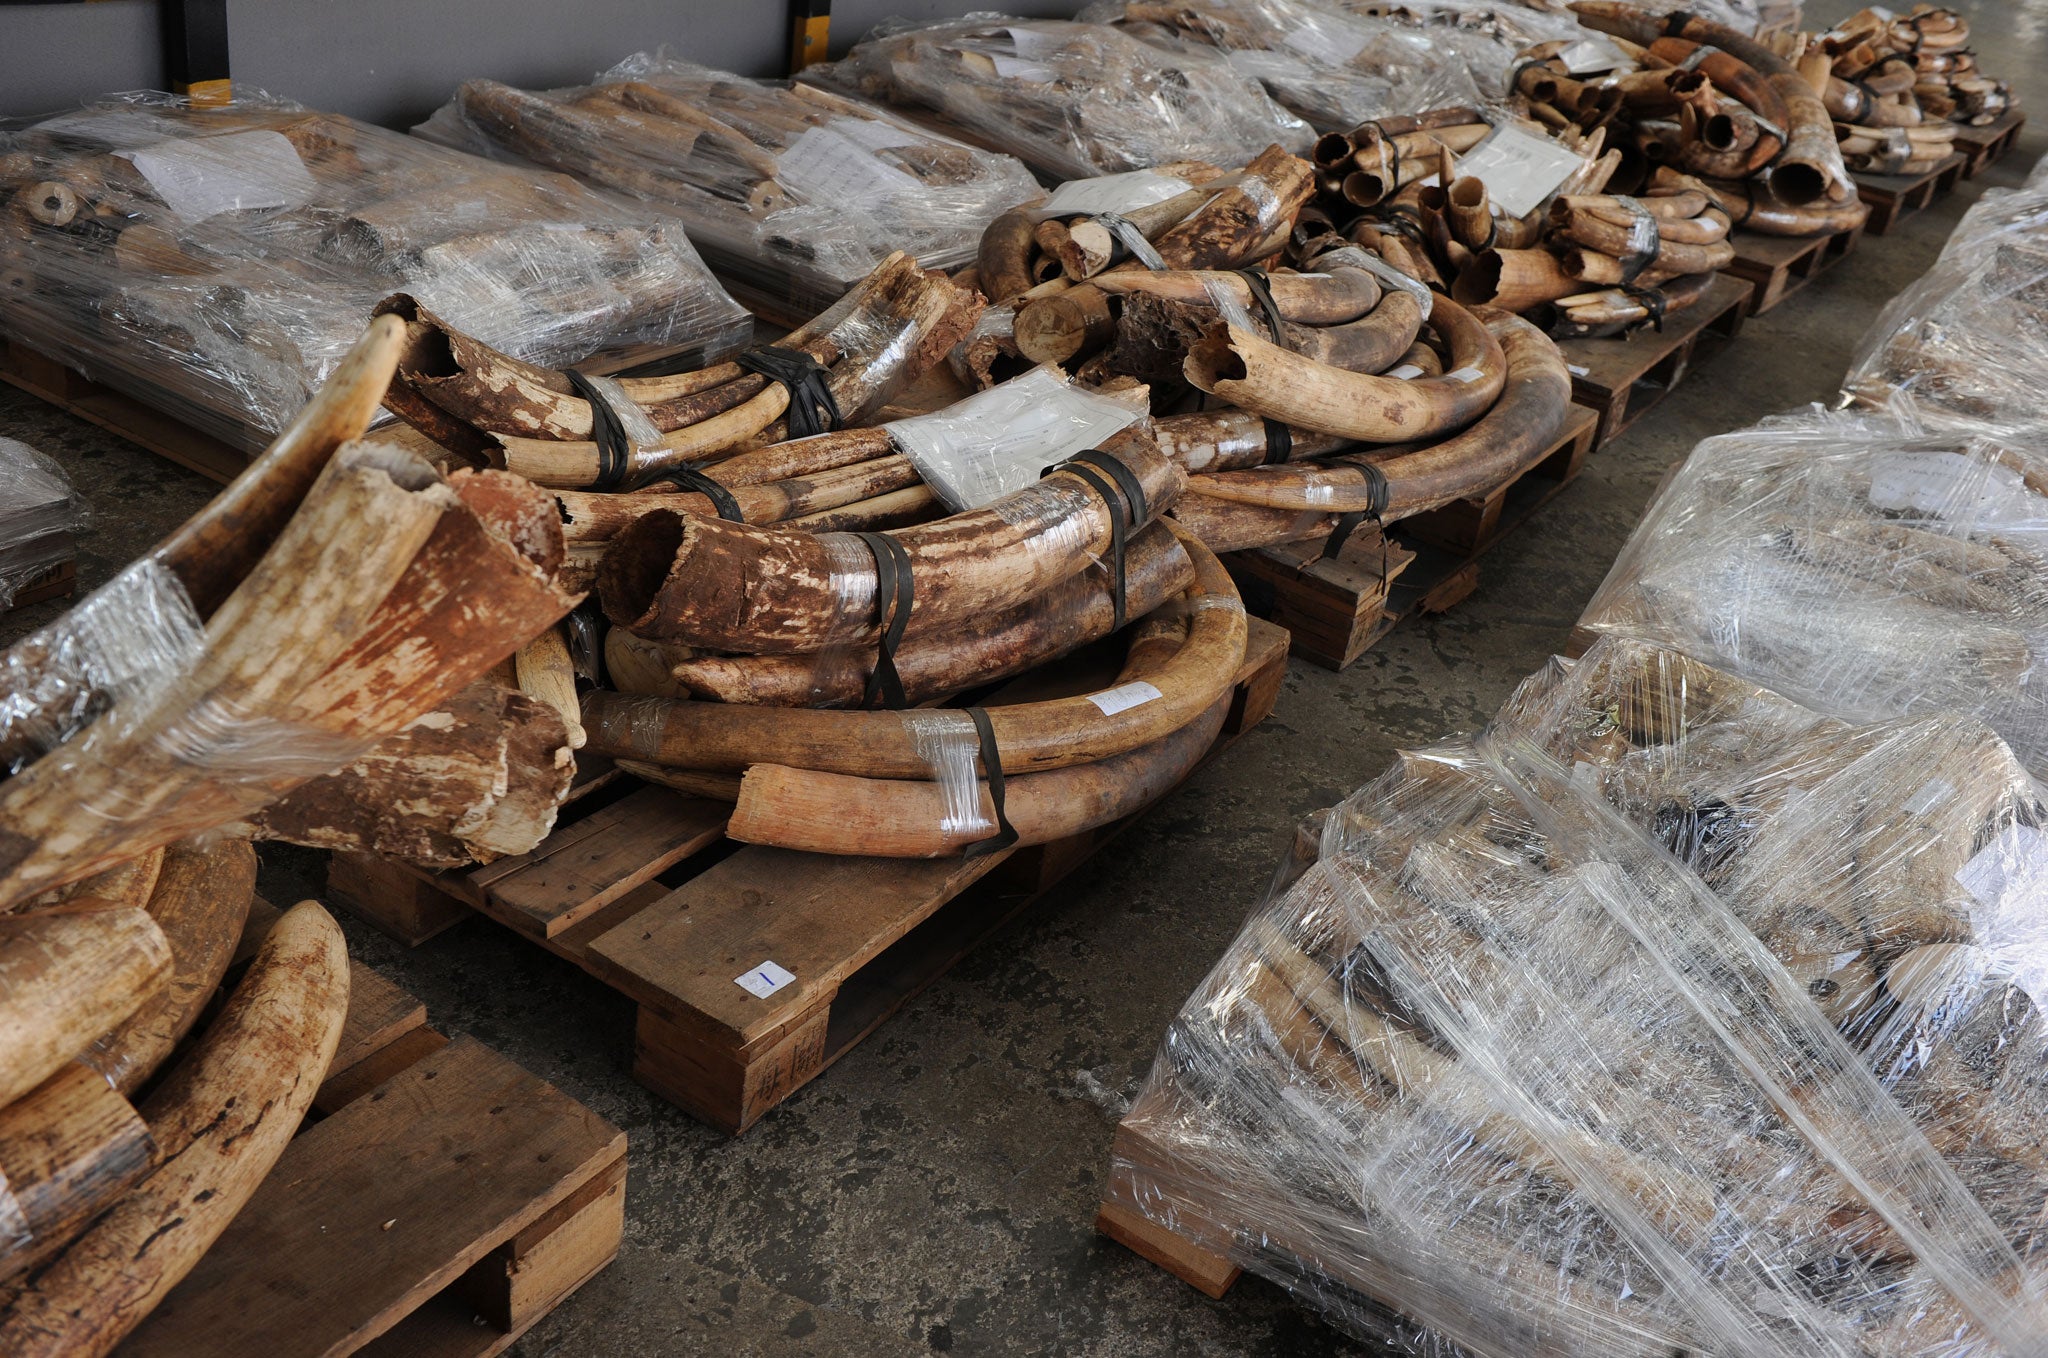 Seized ivory tusks are displayed in Hong Kong. File photo